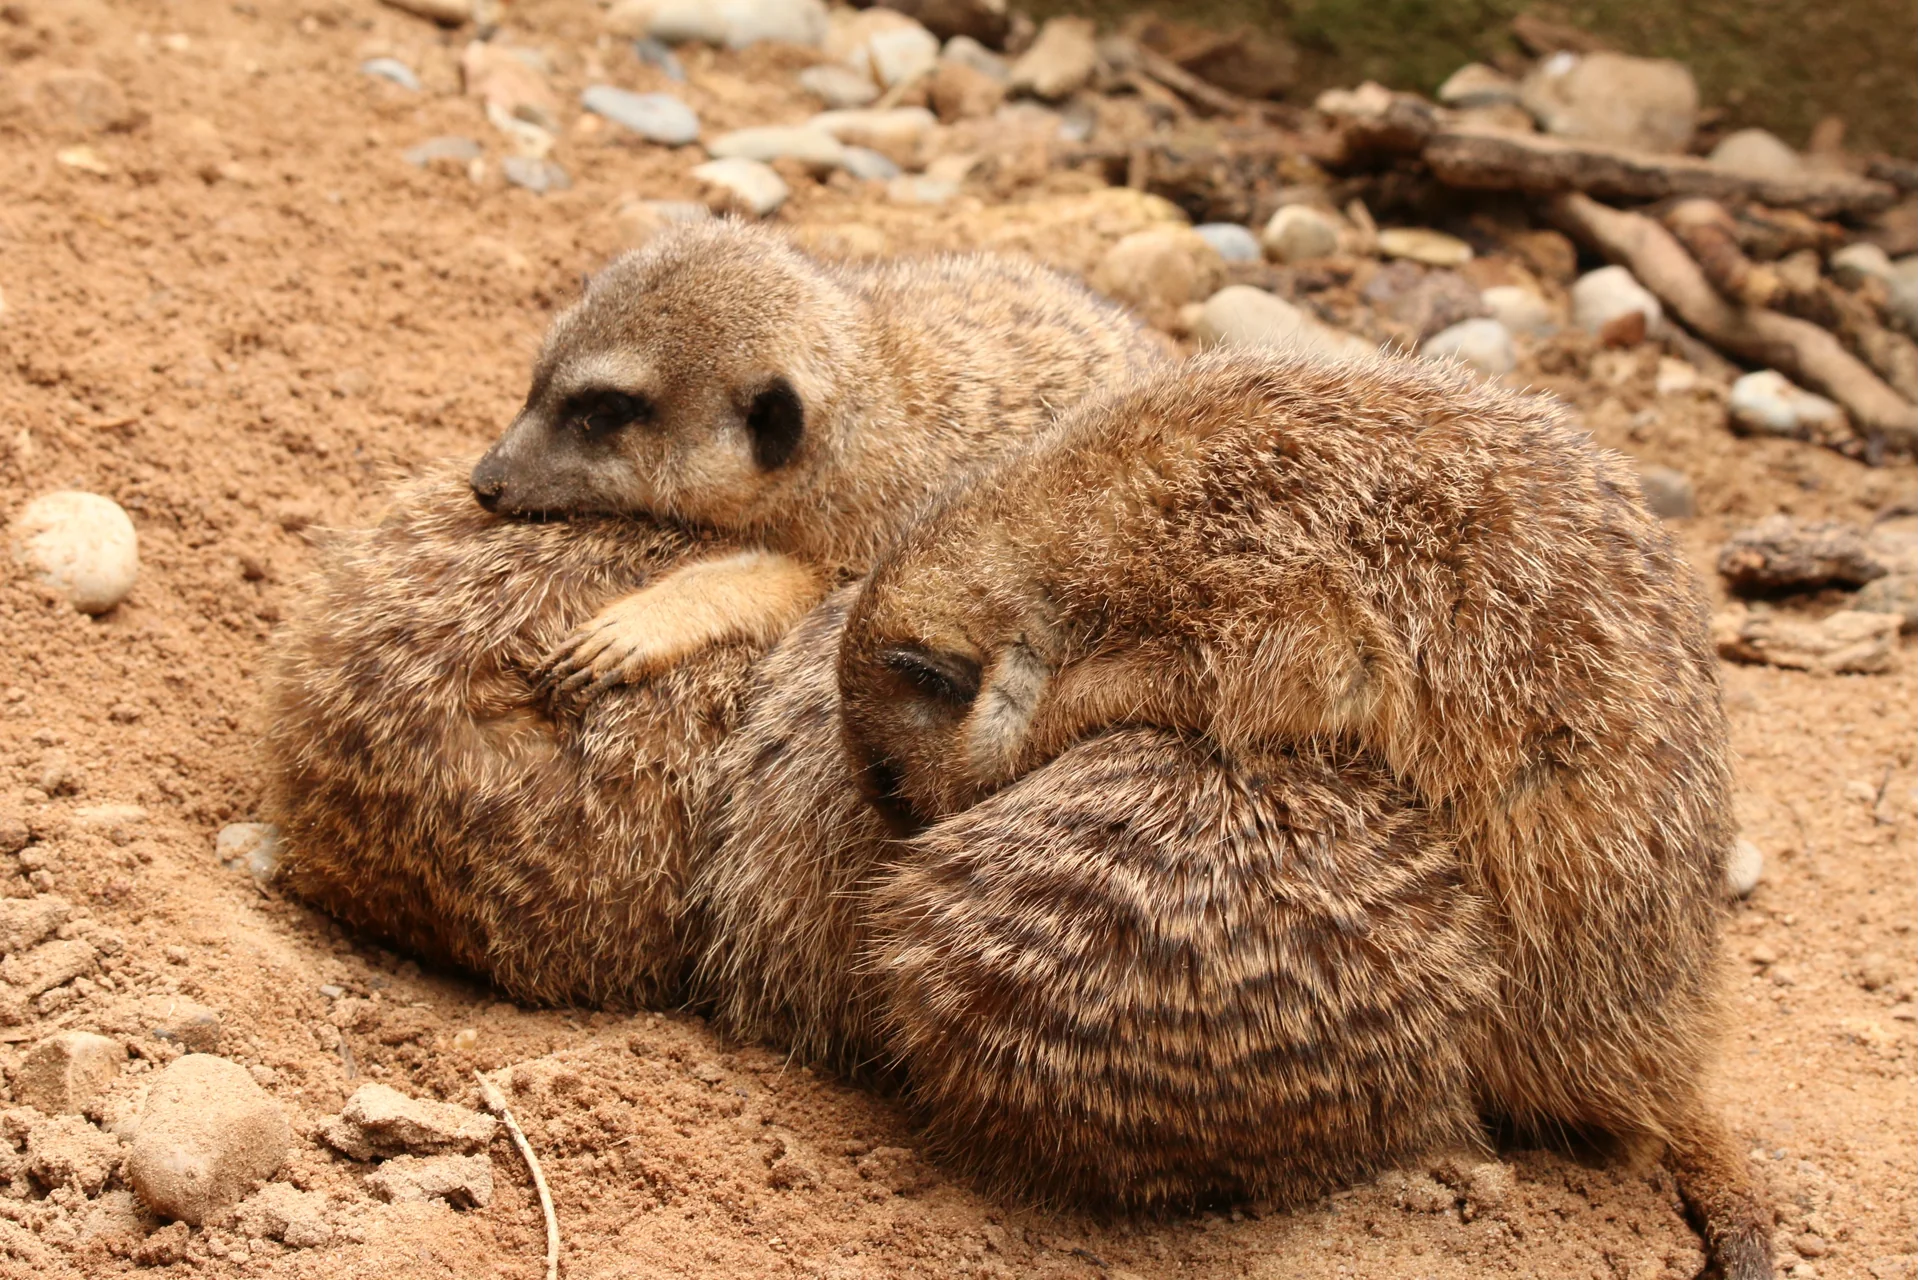 A cuddle pile of 4 meerkats in the sand.